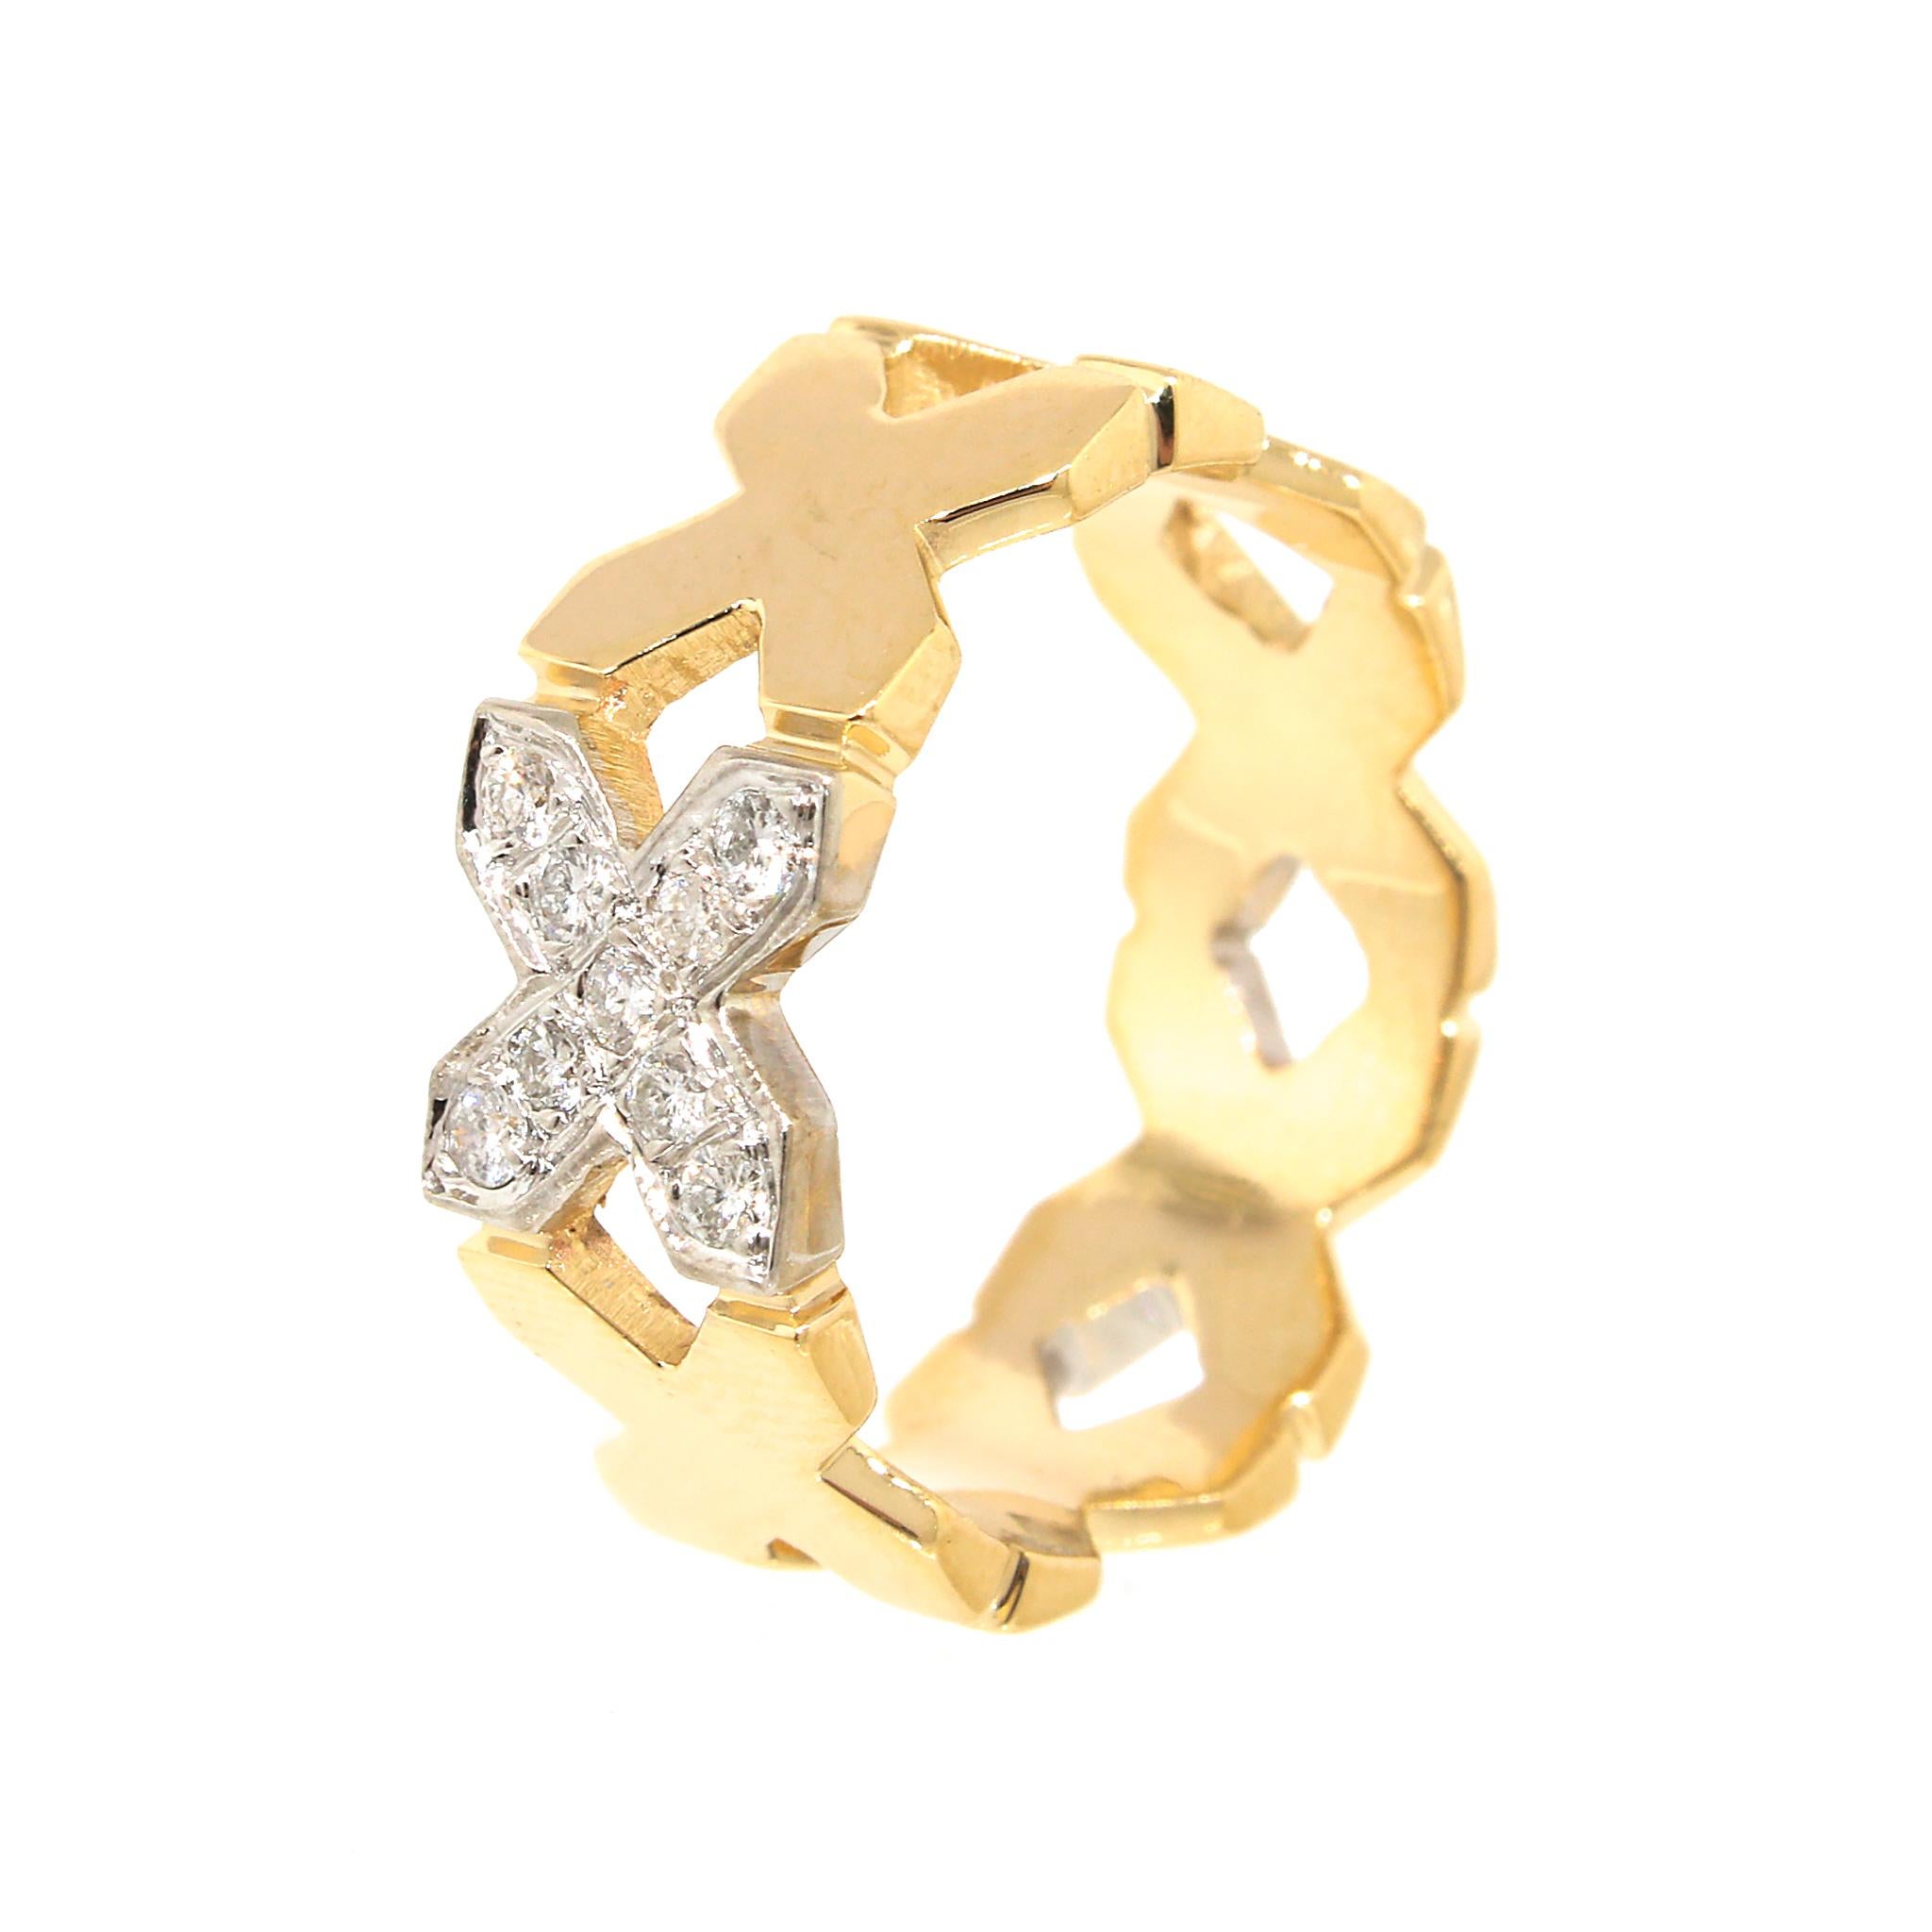 14 kt Yellow Gold
Diamond: 0.16 ct twd
Ring Size: 7.25
Total Weight: 5.5 grams